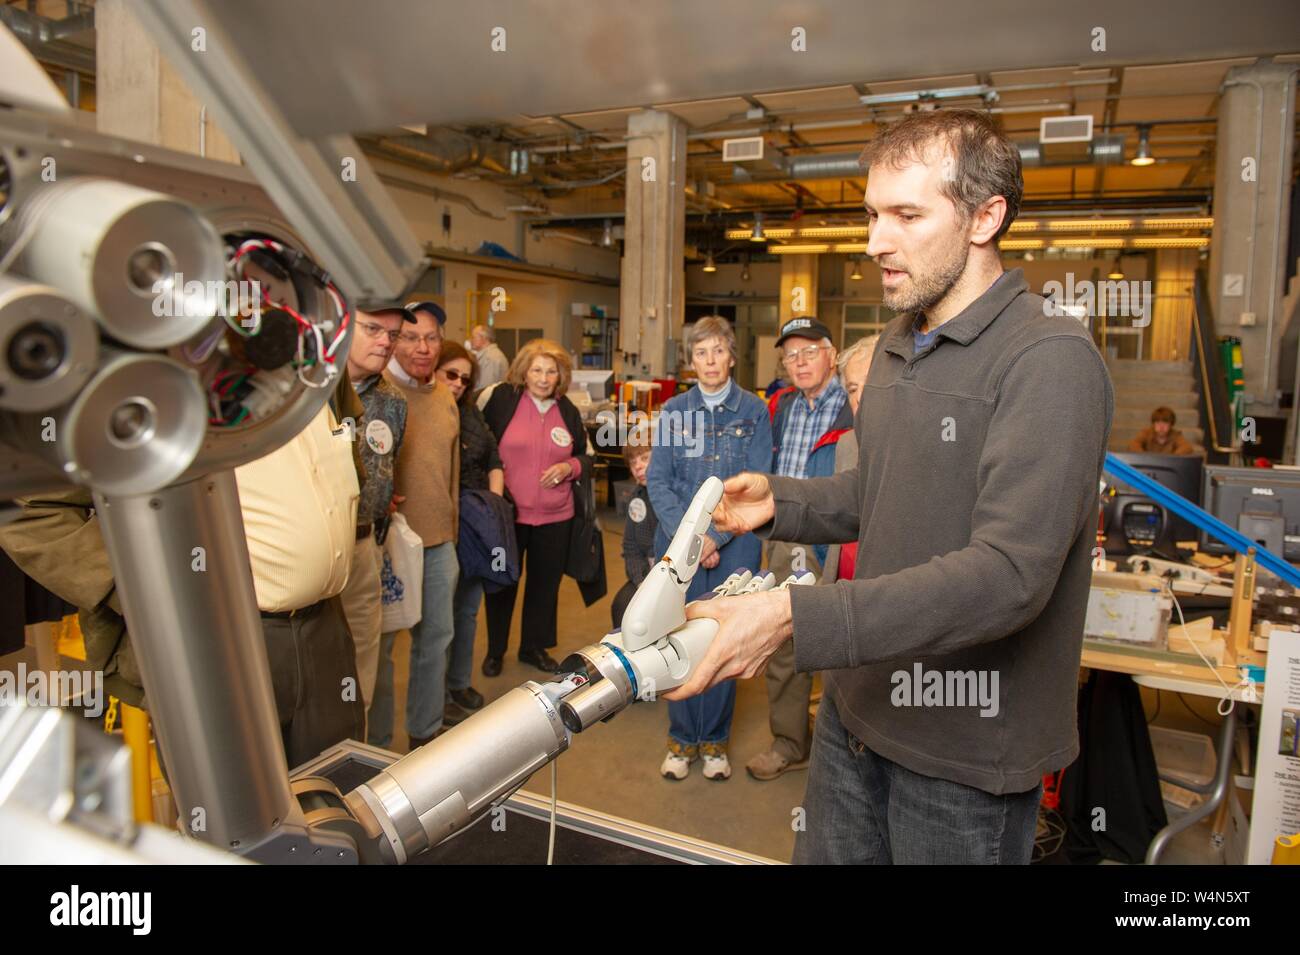 A person demonstrates robotics development laboratory equipment for a tour group visiting the Johns Hopkins University, Baltimore, Maryland, April 10, 2010. From the Homewood Photography Collection. () Stock Photo